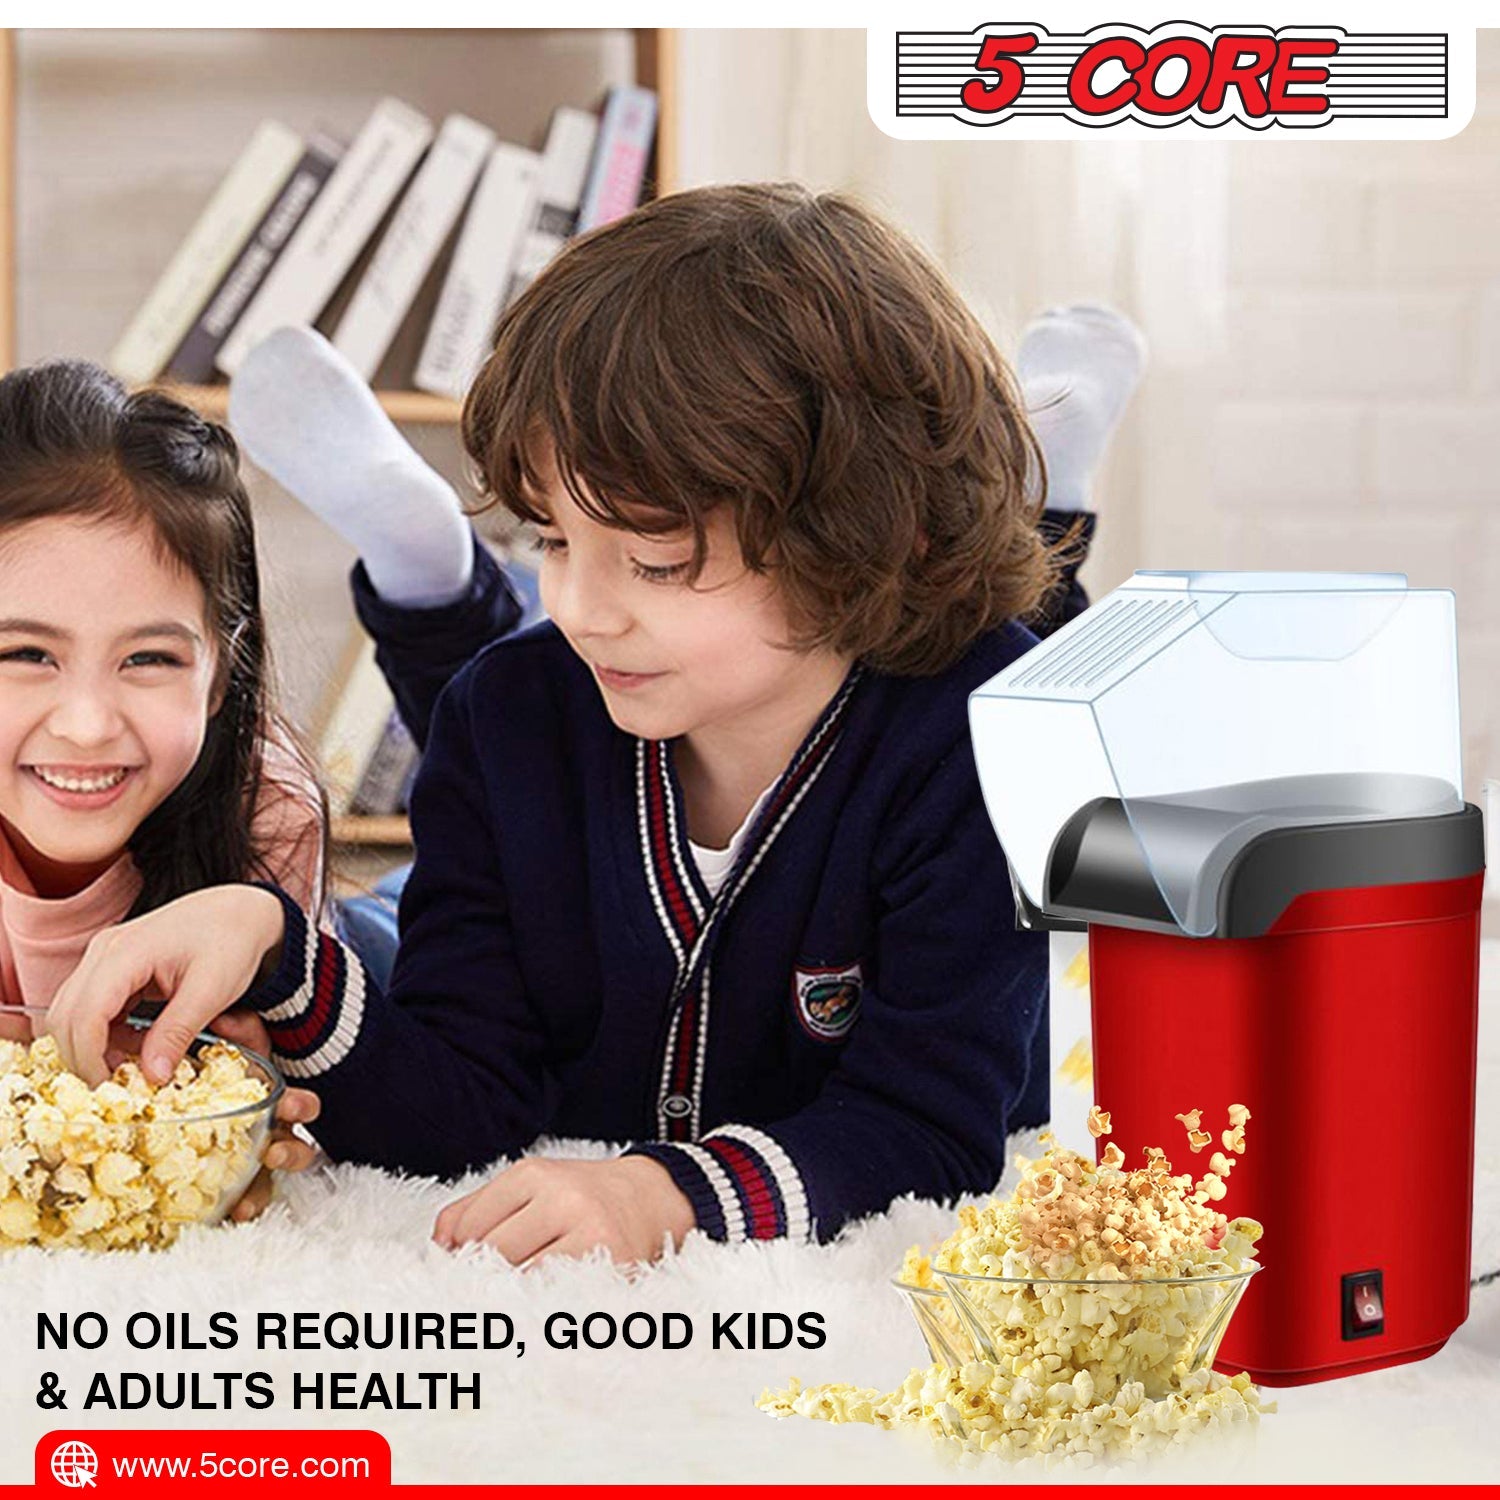 Automatic Popcorn Machine Variety of flavors Popcorn Ball Machine Electric Popcorn  Maker With Timing And Keep Warm Function